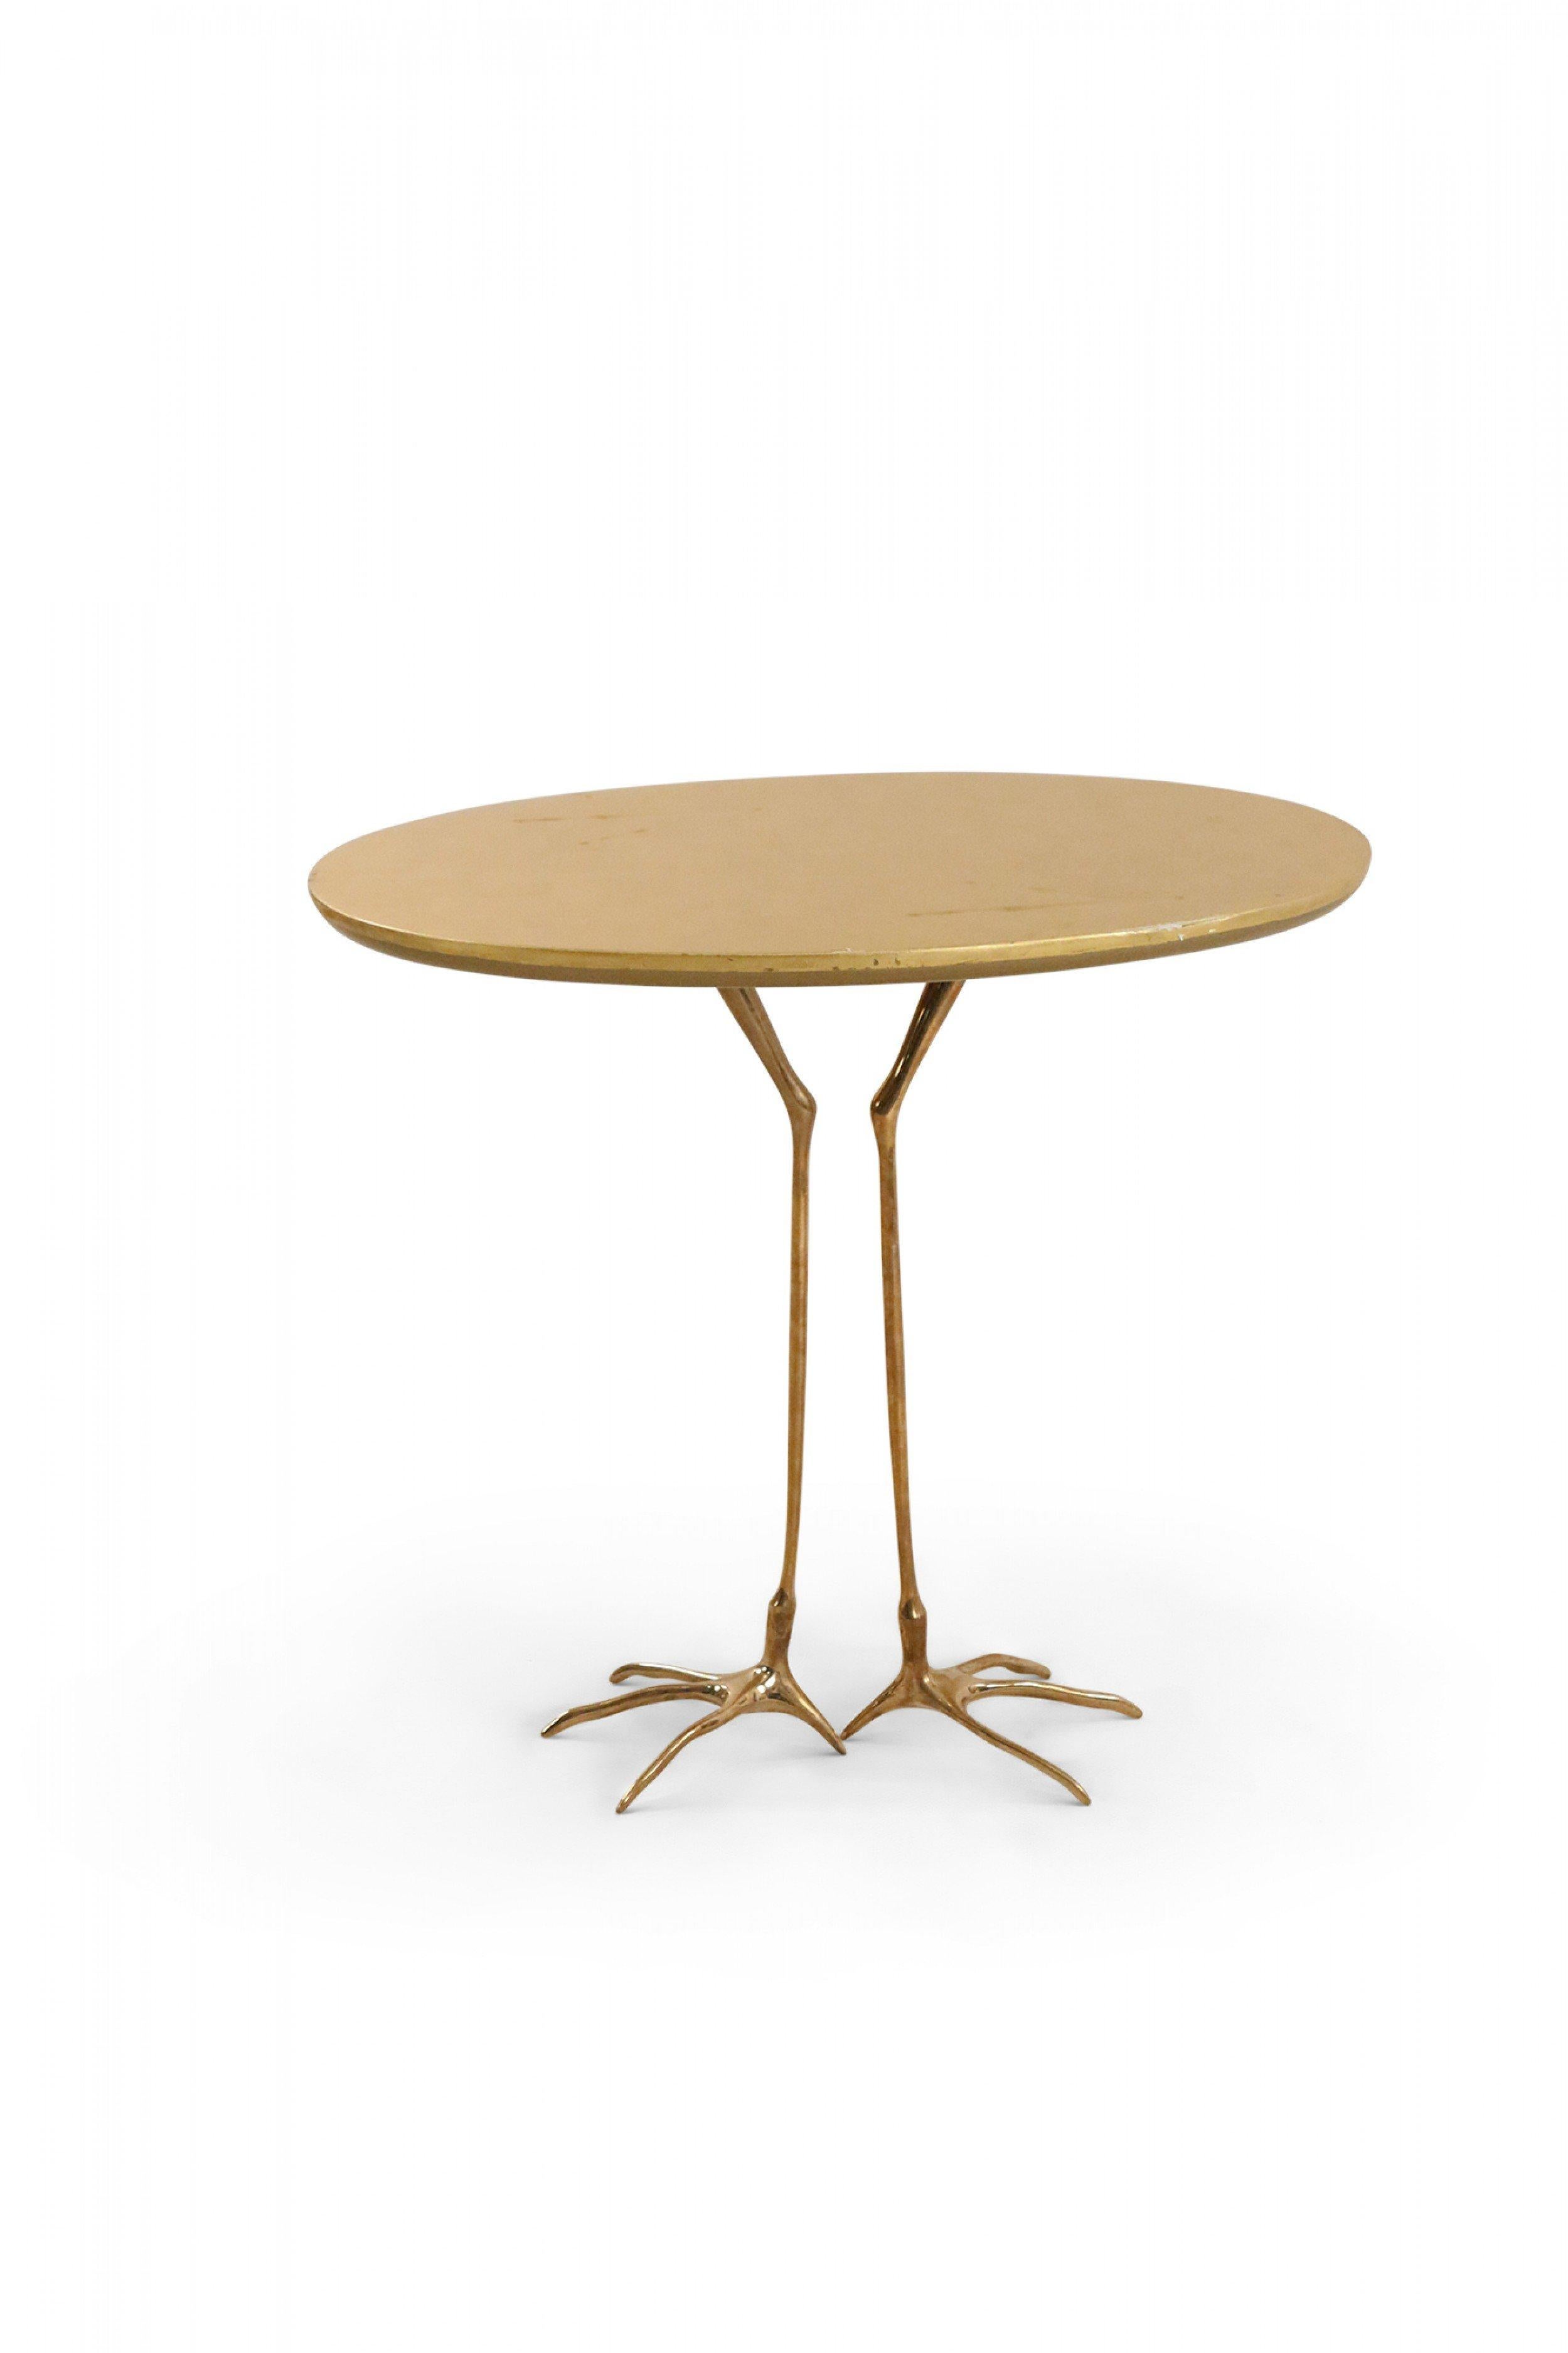 20th Century Meret Oppenheim Mid-Century Gilt Metal Bird Foot End Table For Sale